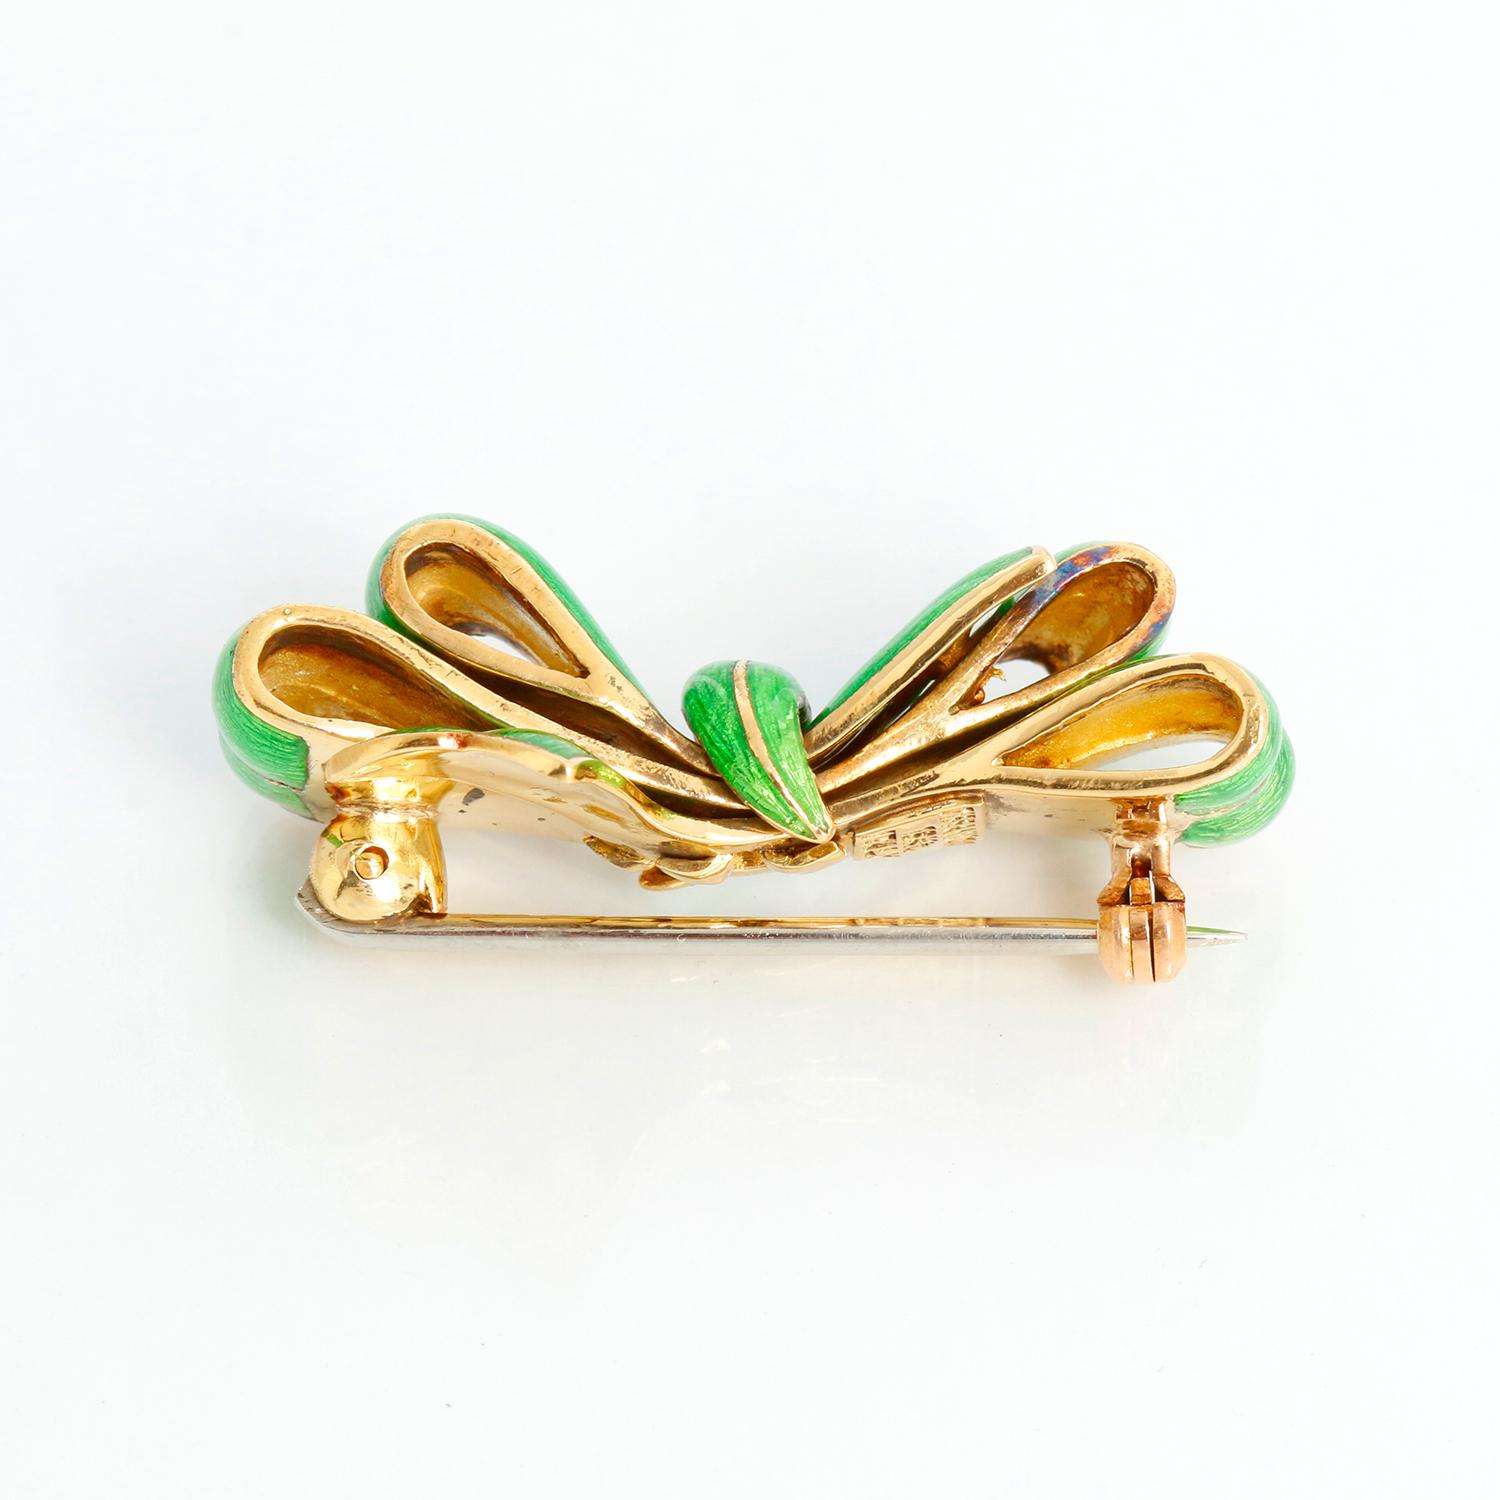 Tiffany & Co. Vintage Yellow Gold Green Enamel Bow Pin Brooch - A sweet vintage bow pin brooch by Tiffany & Co. made of 18k yellow gold and green enamel. Stamped with Tiffany & Co. maker's mark, a hallmark for 18k gold and a country of origin